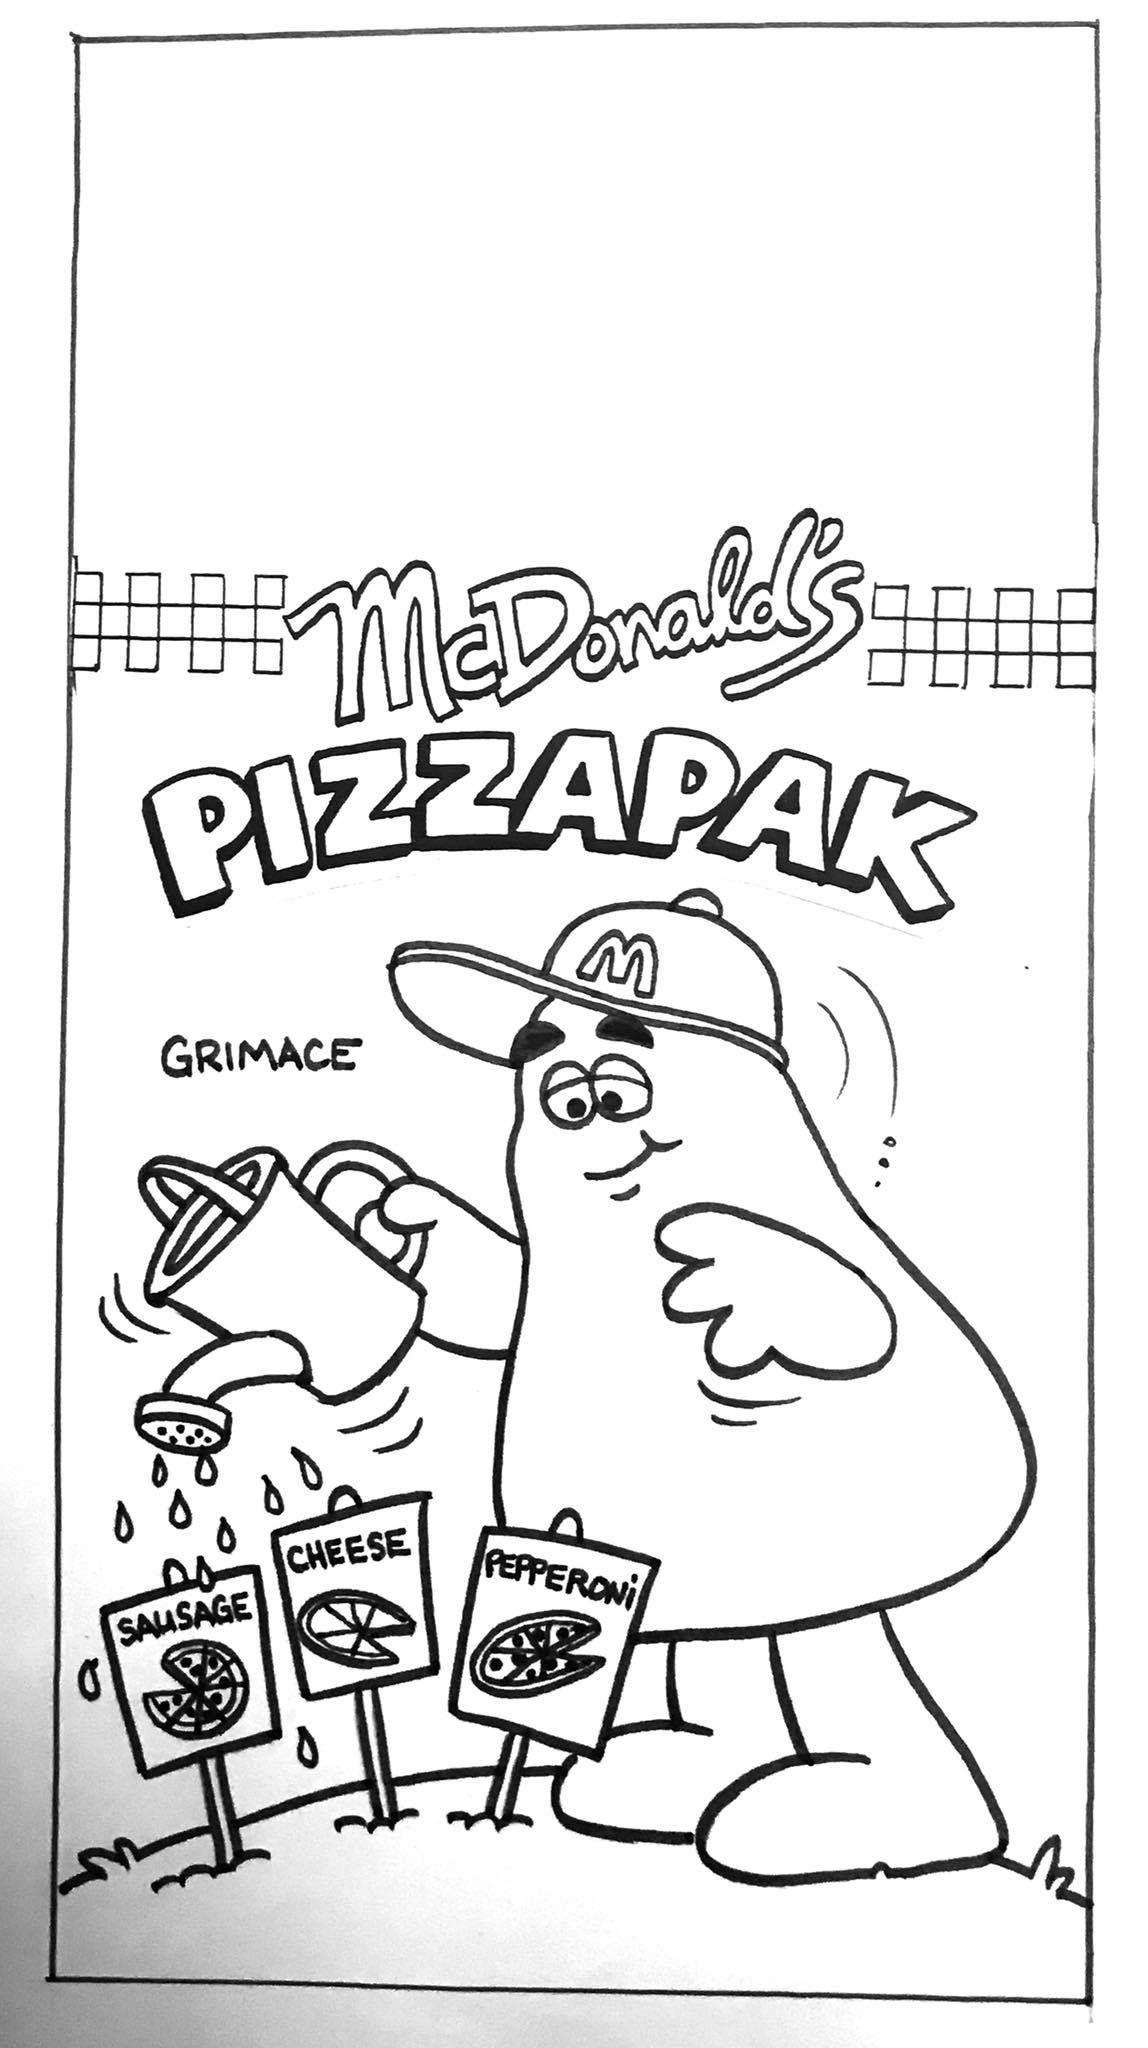 In the late s i was asked to explore some kids packaging conceptsdesigns for mcpizza we all knoâ coloring book pages kids packaging easy disney drawings